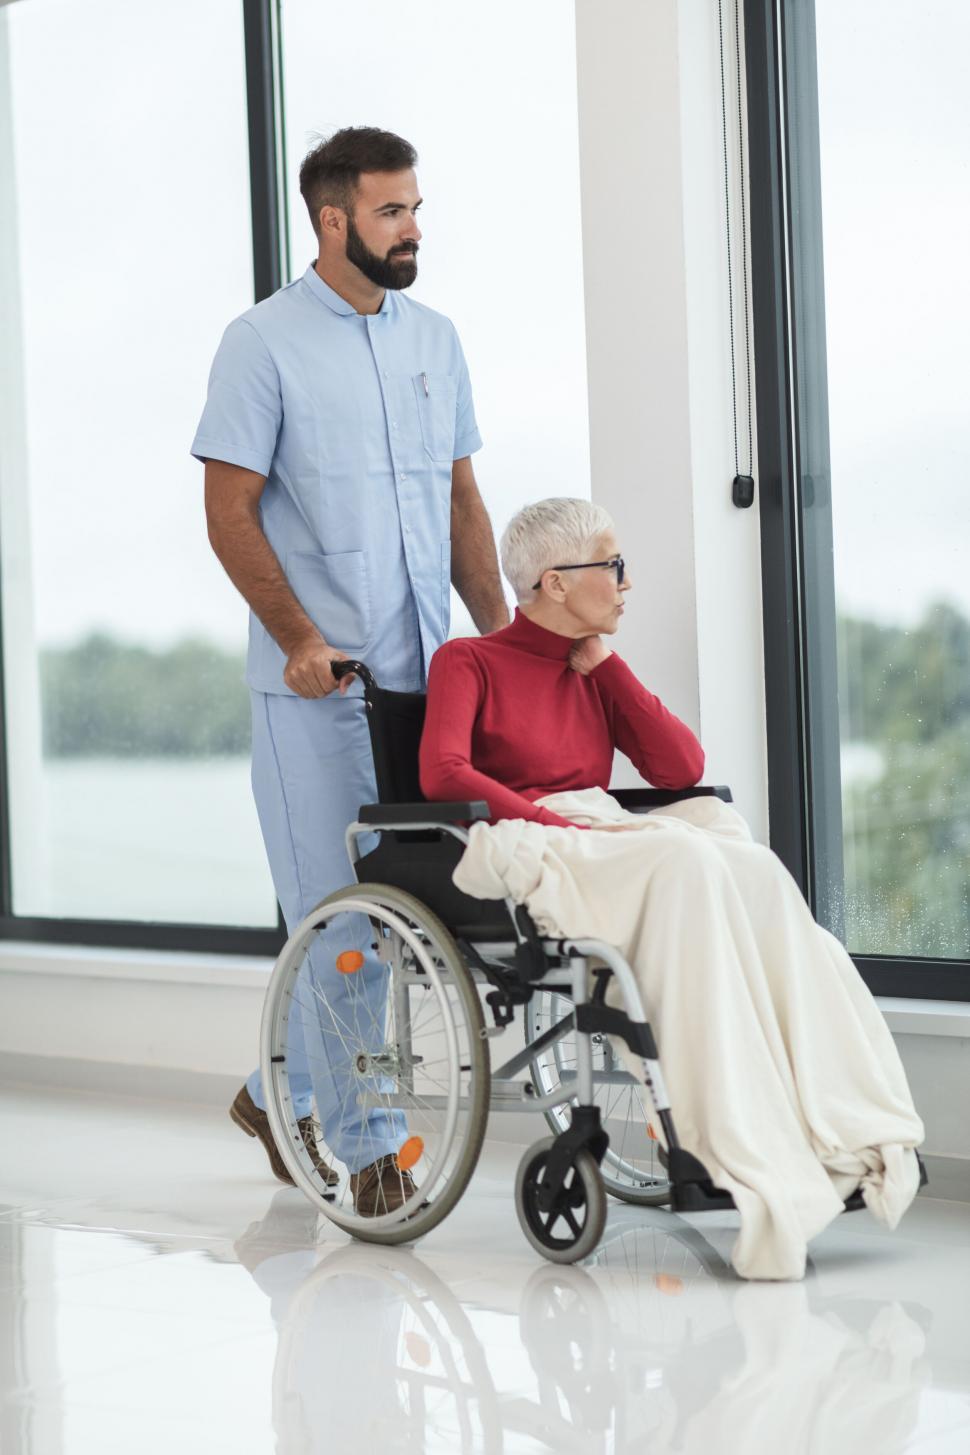 Free Image of Elderly woman in wheelchair with caregiver 